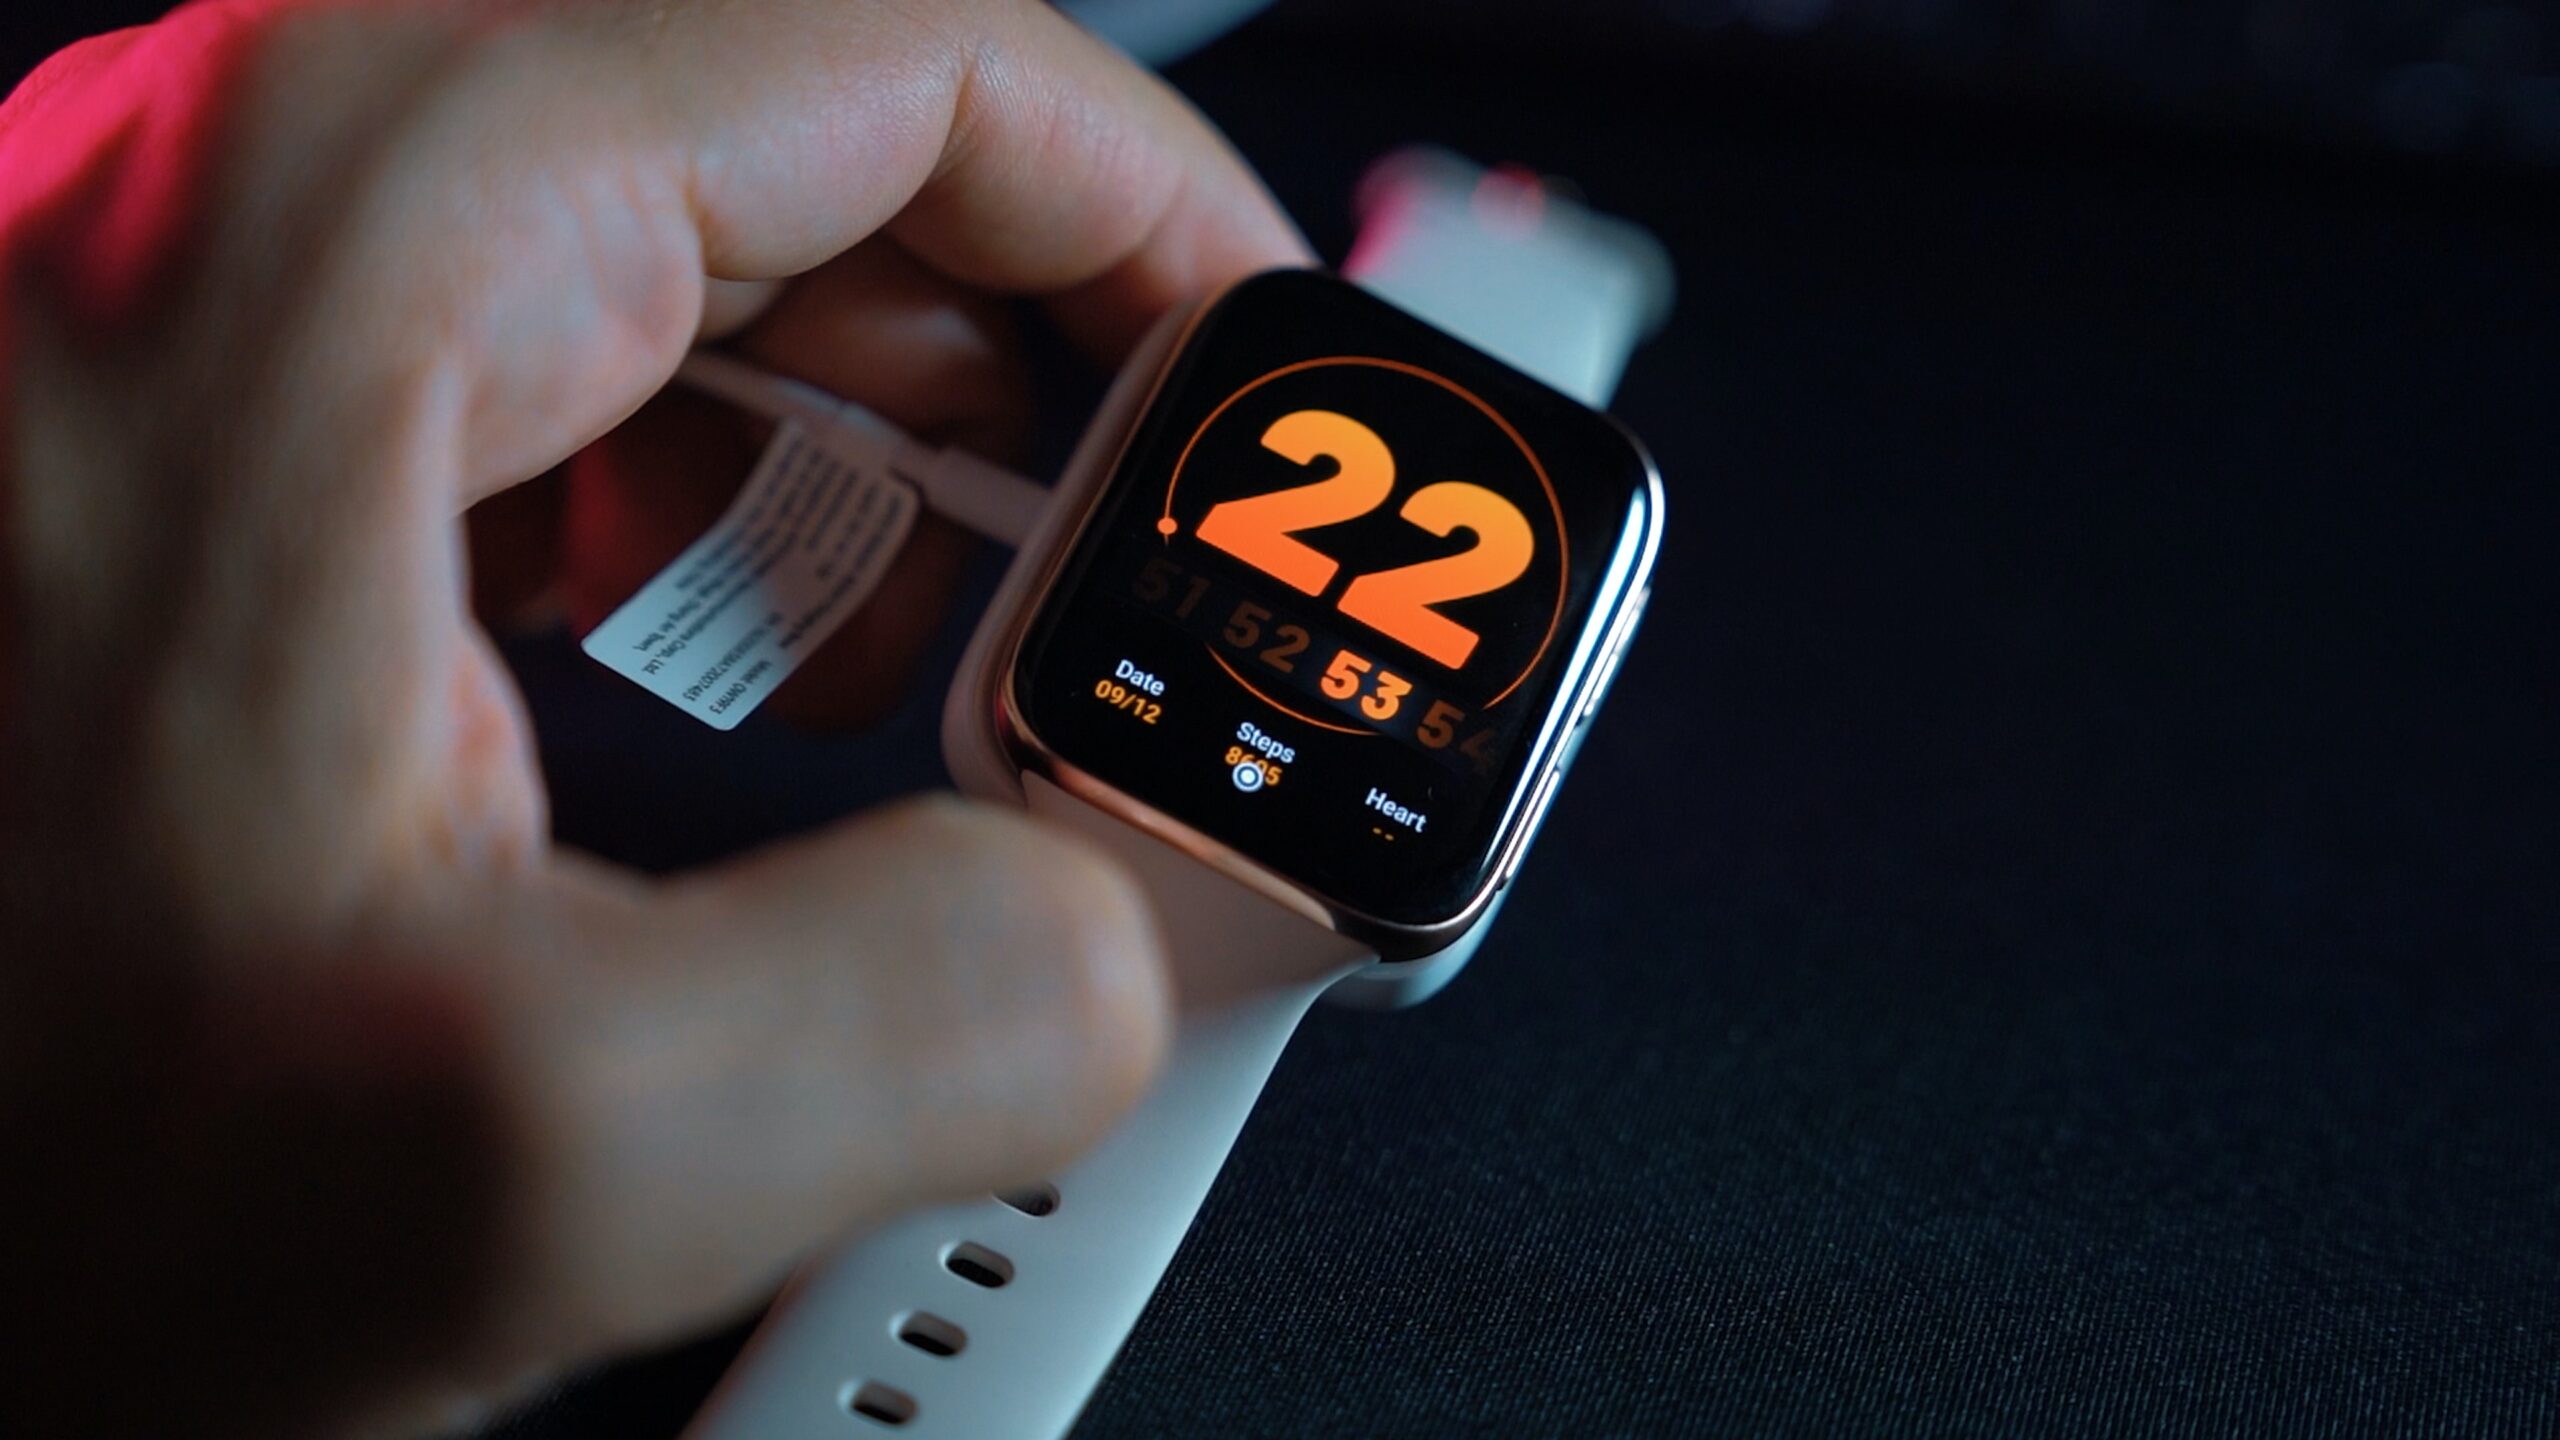 How to view apple watch workouts on iphone